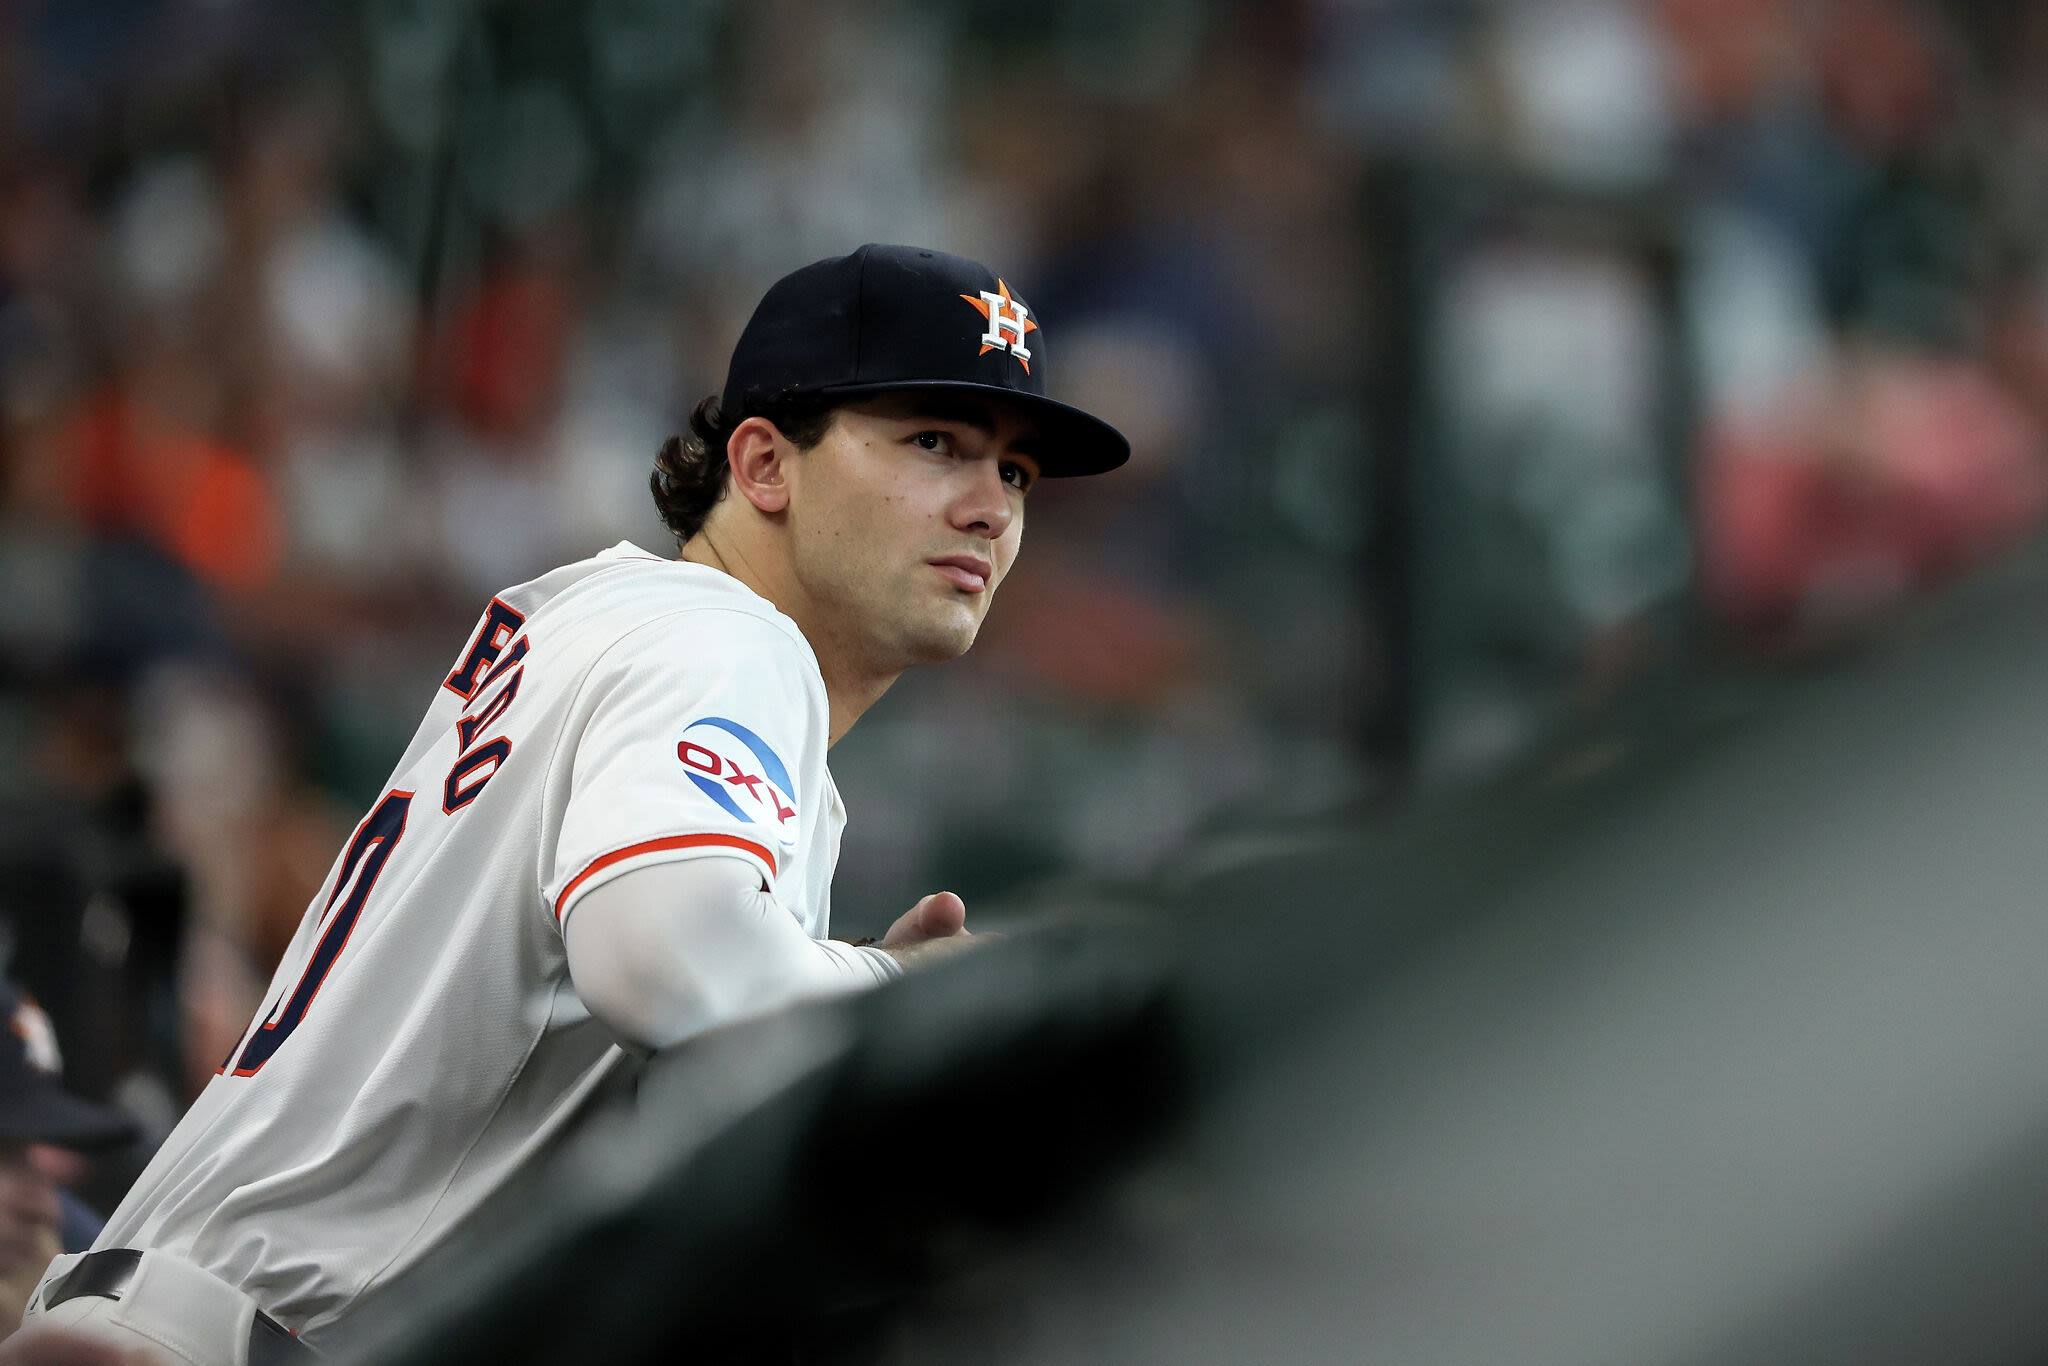 Joey Loperfido poised for Astros return. Is he here to stay?